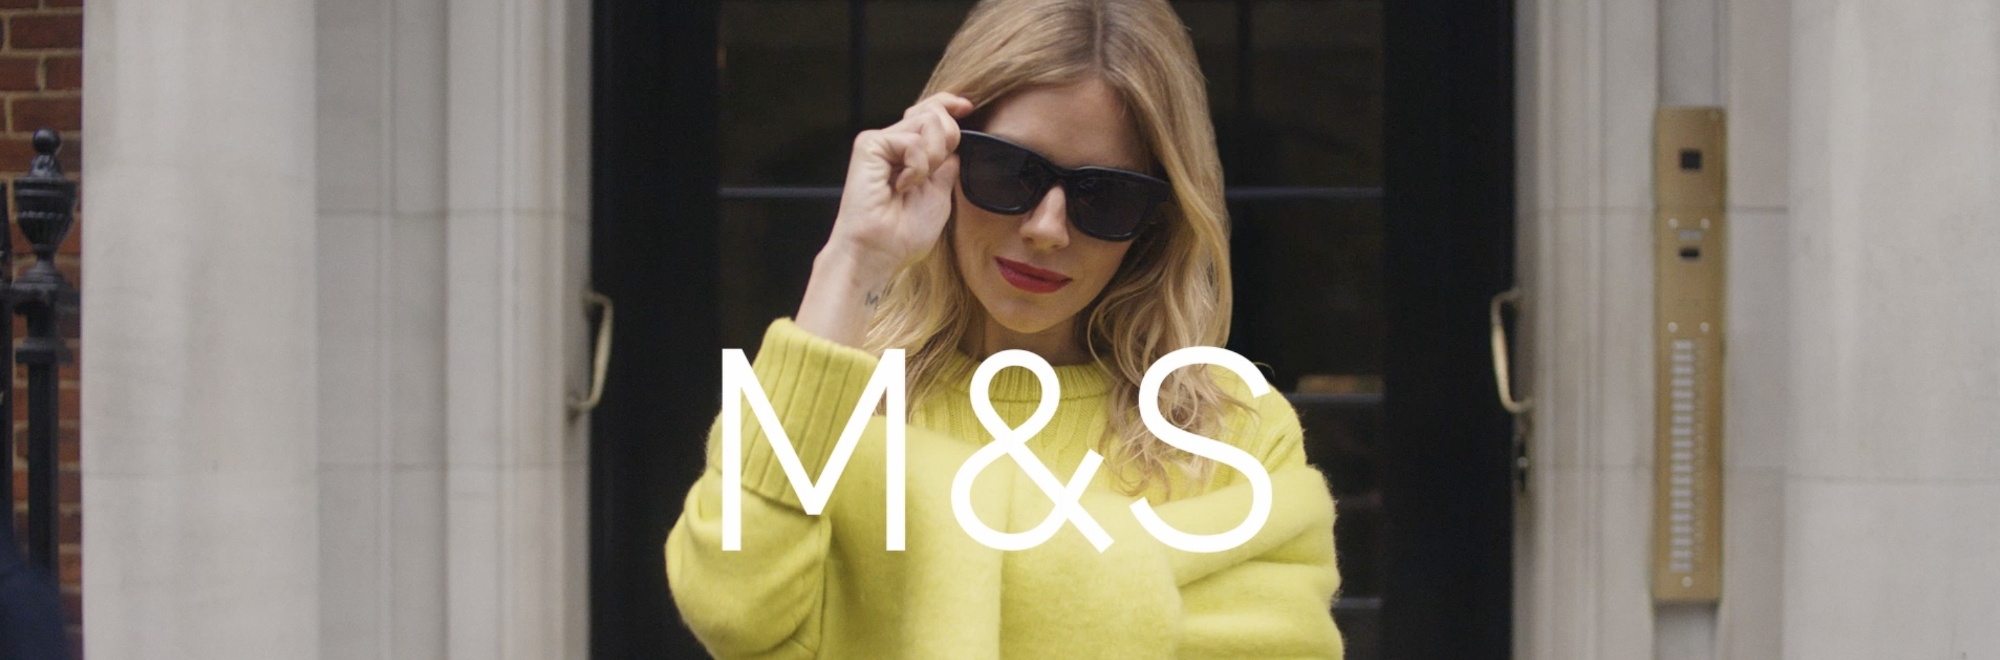 Sienna Miller champions the transformative power of fashion in new M&S campaign